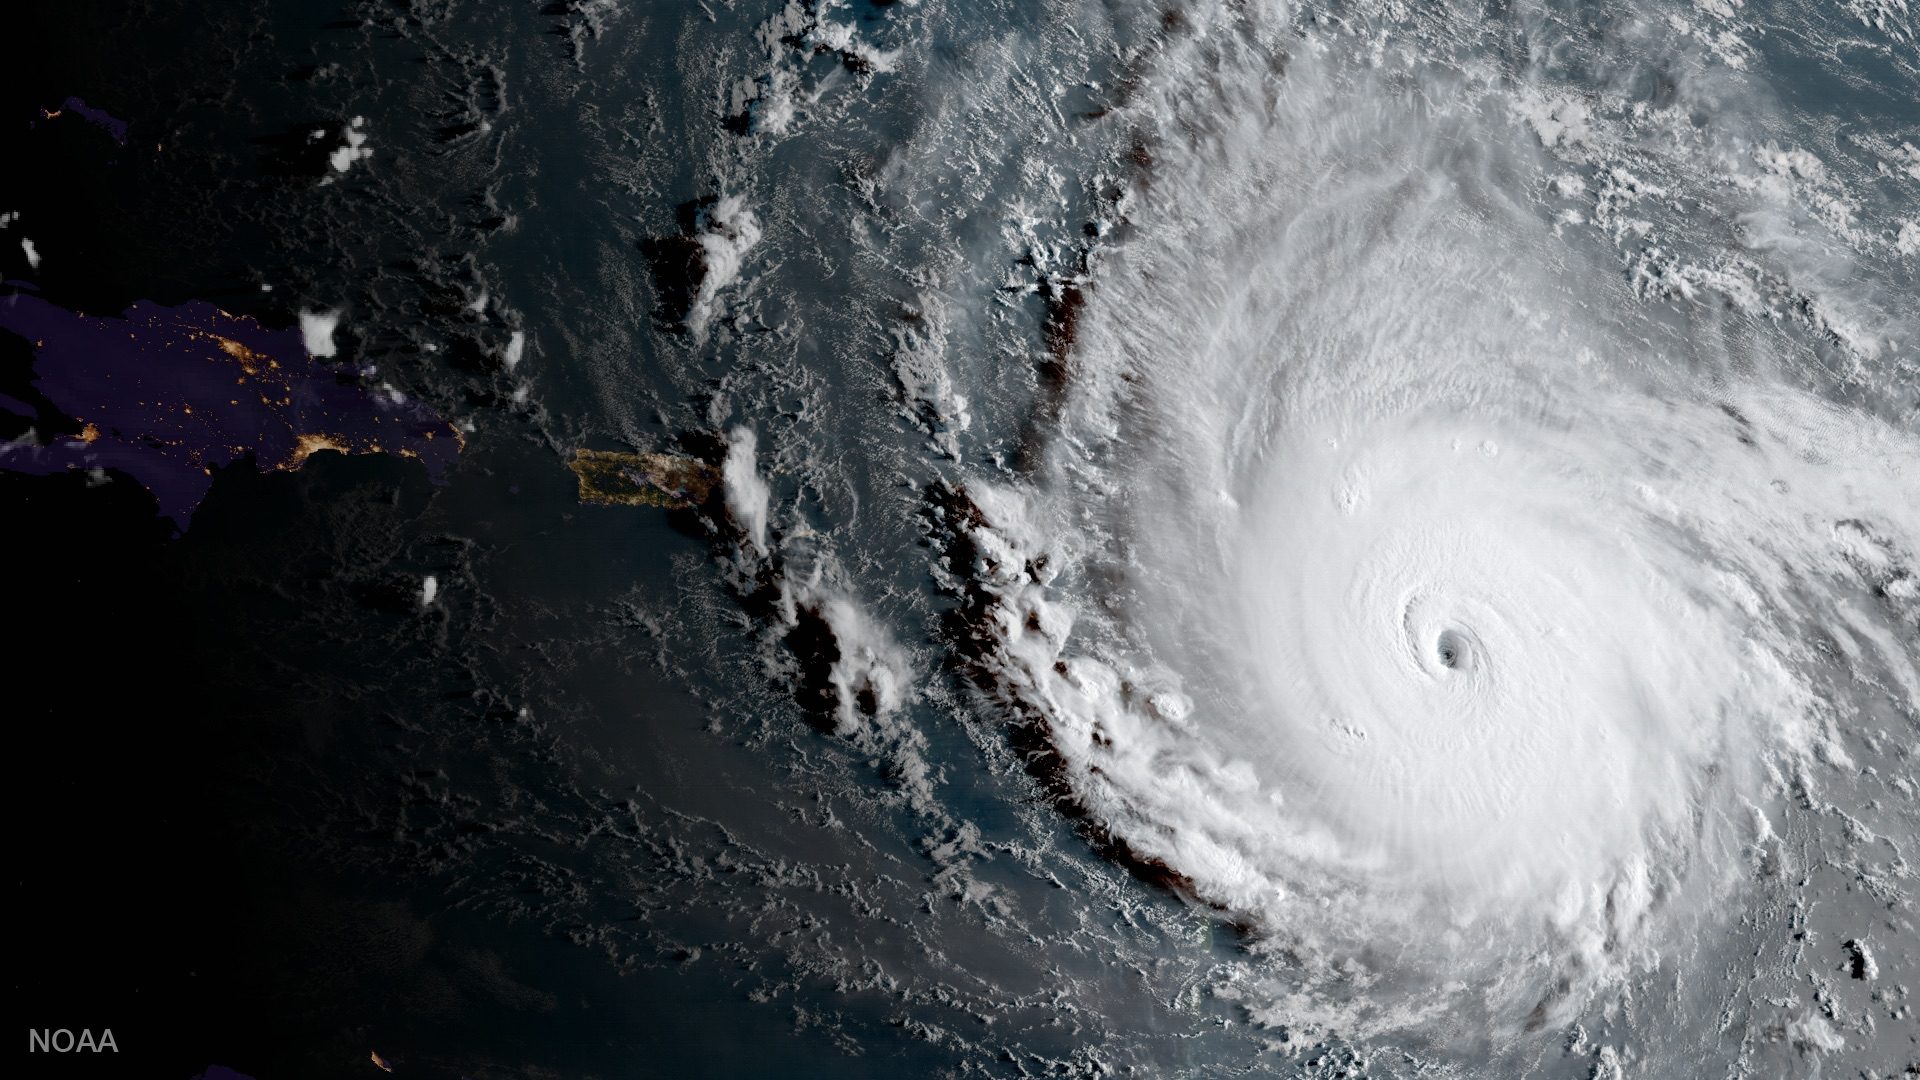 NOAA’s New Weather Satellite Captured Stunning Images of Hurricanes Harvey and Irma